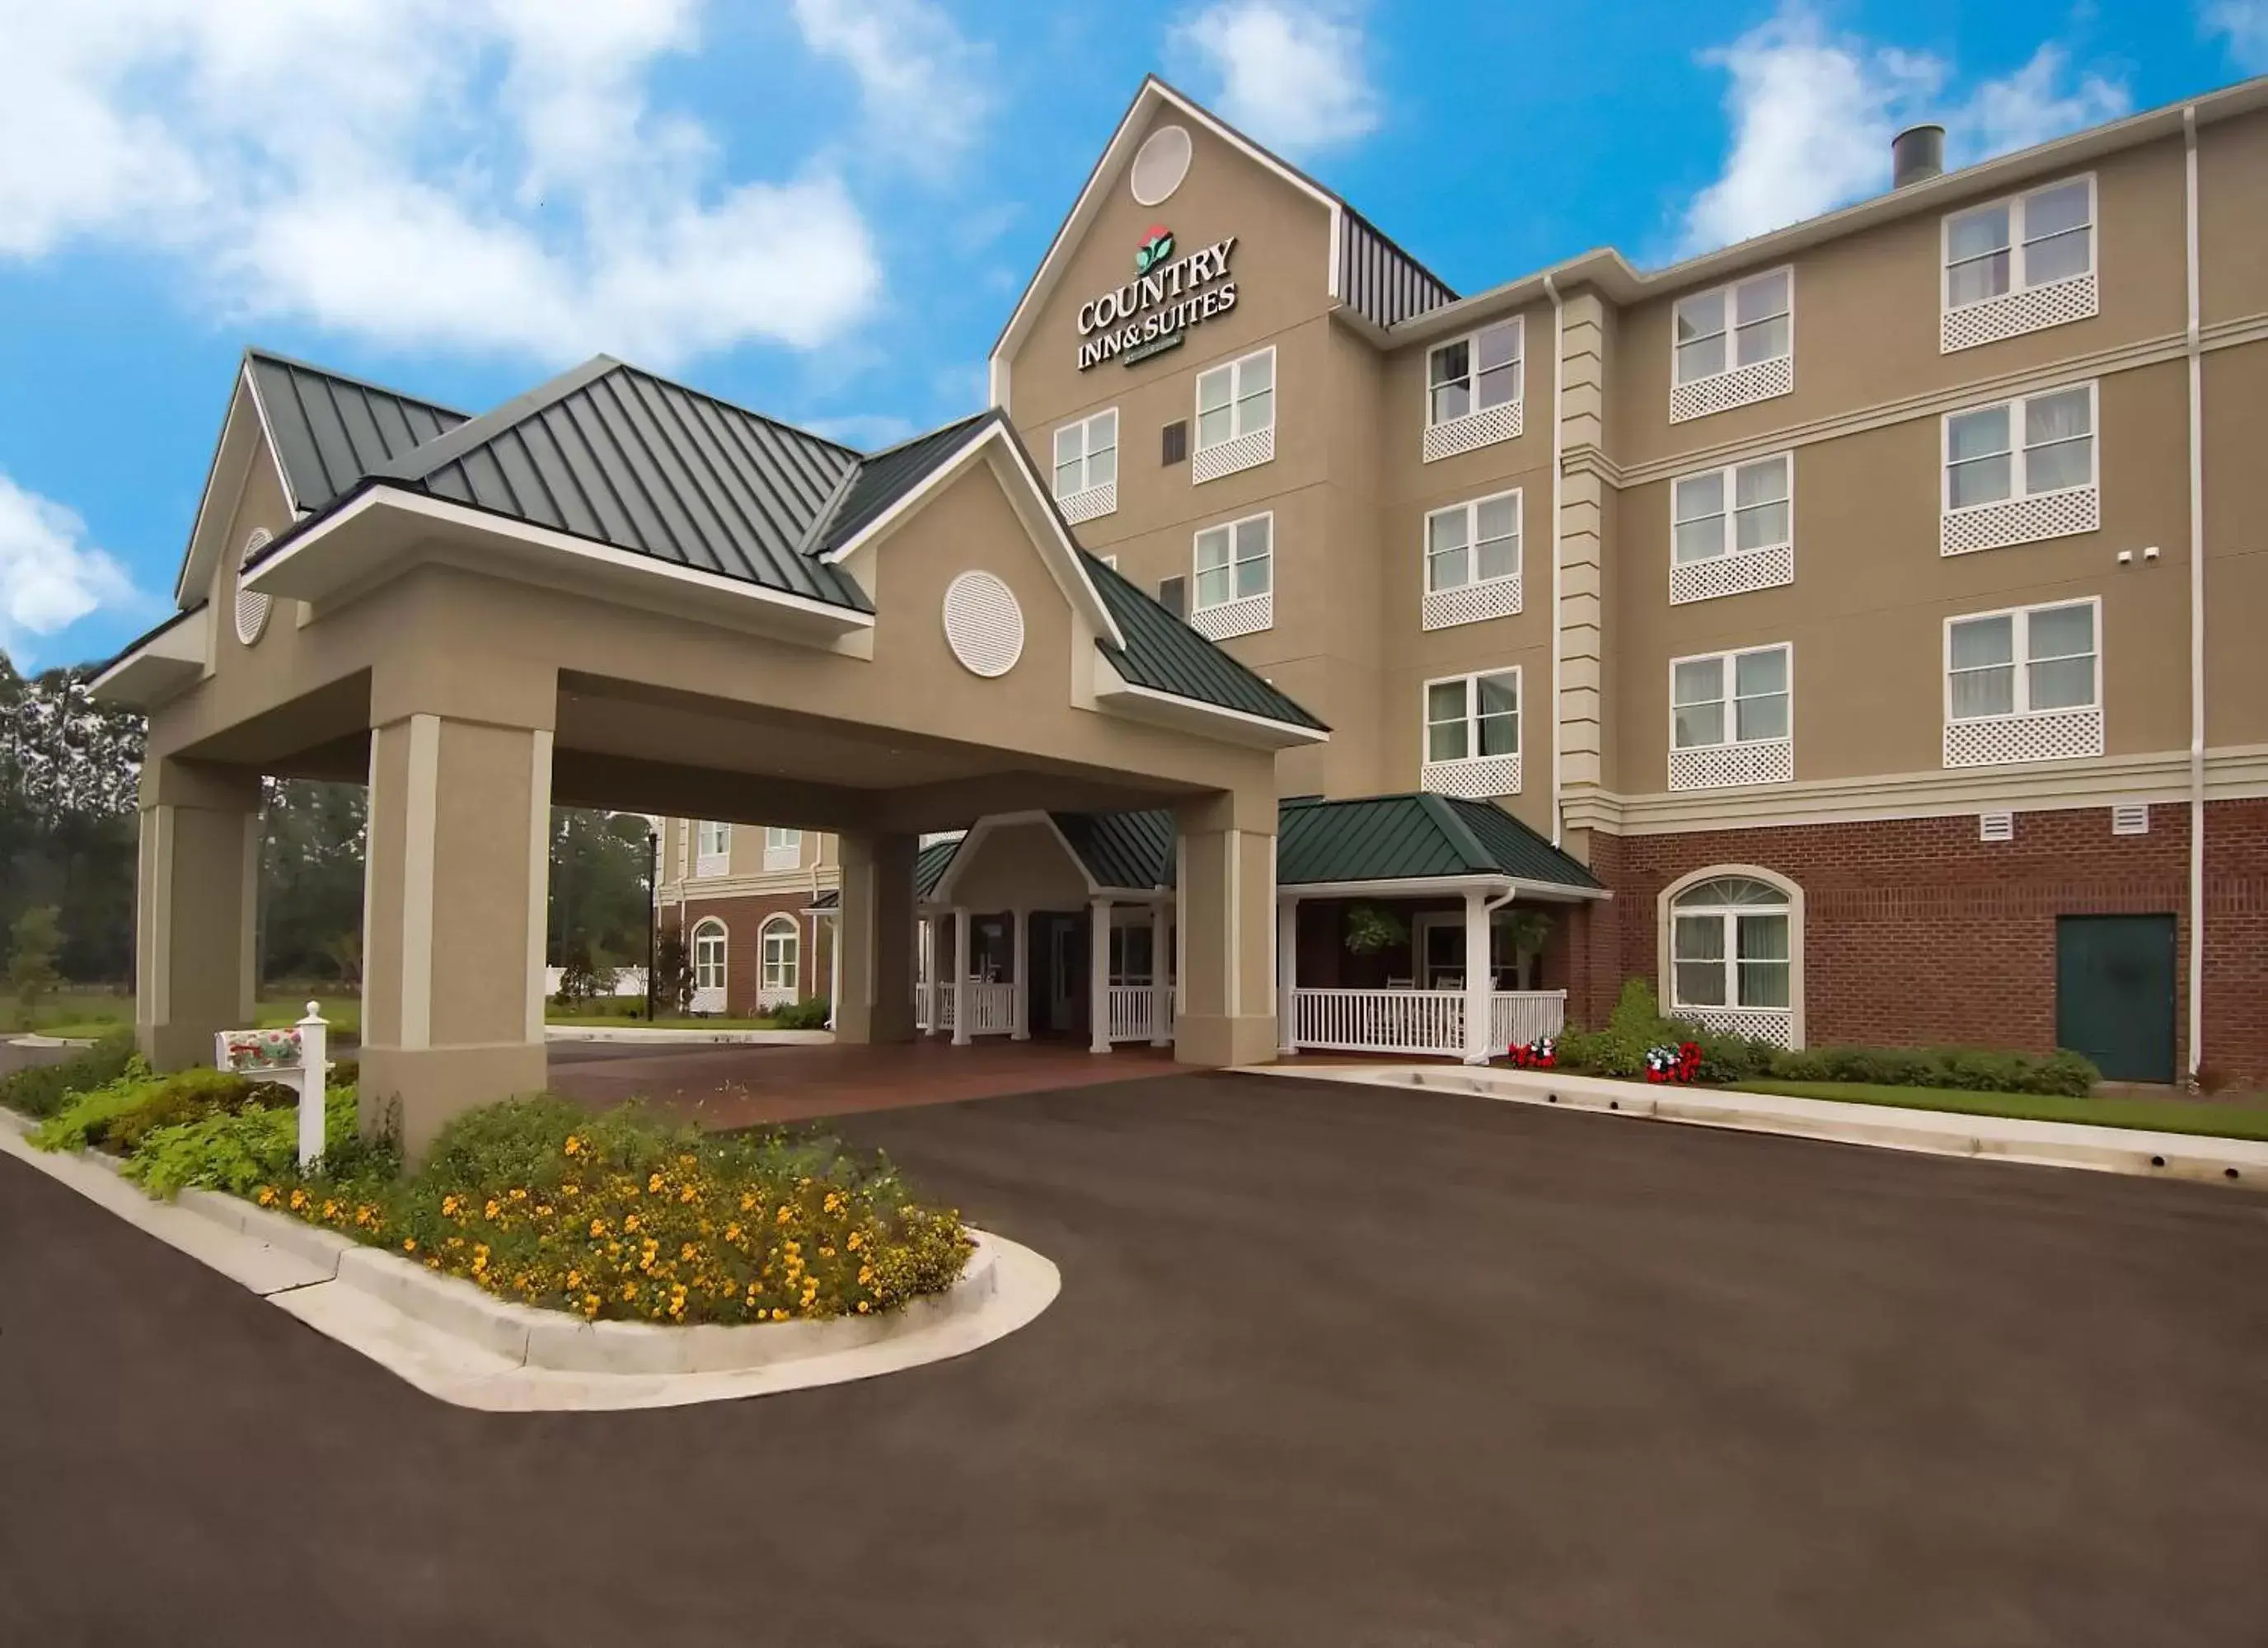 Facade/entrance, Property Building in Country Inn & Suites by Radisson, Summerville, SC